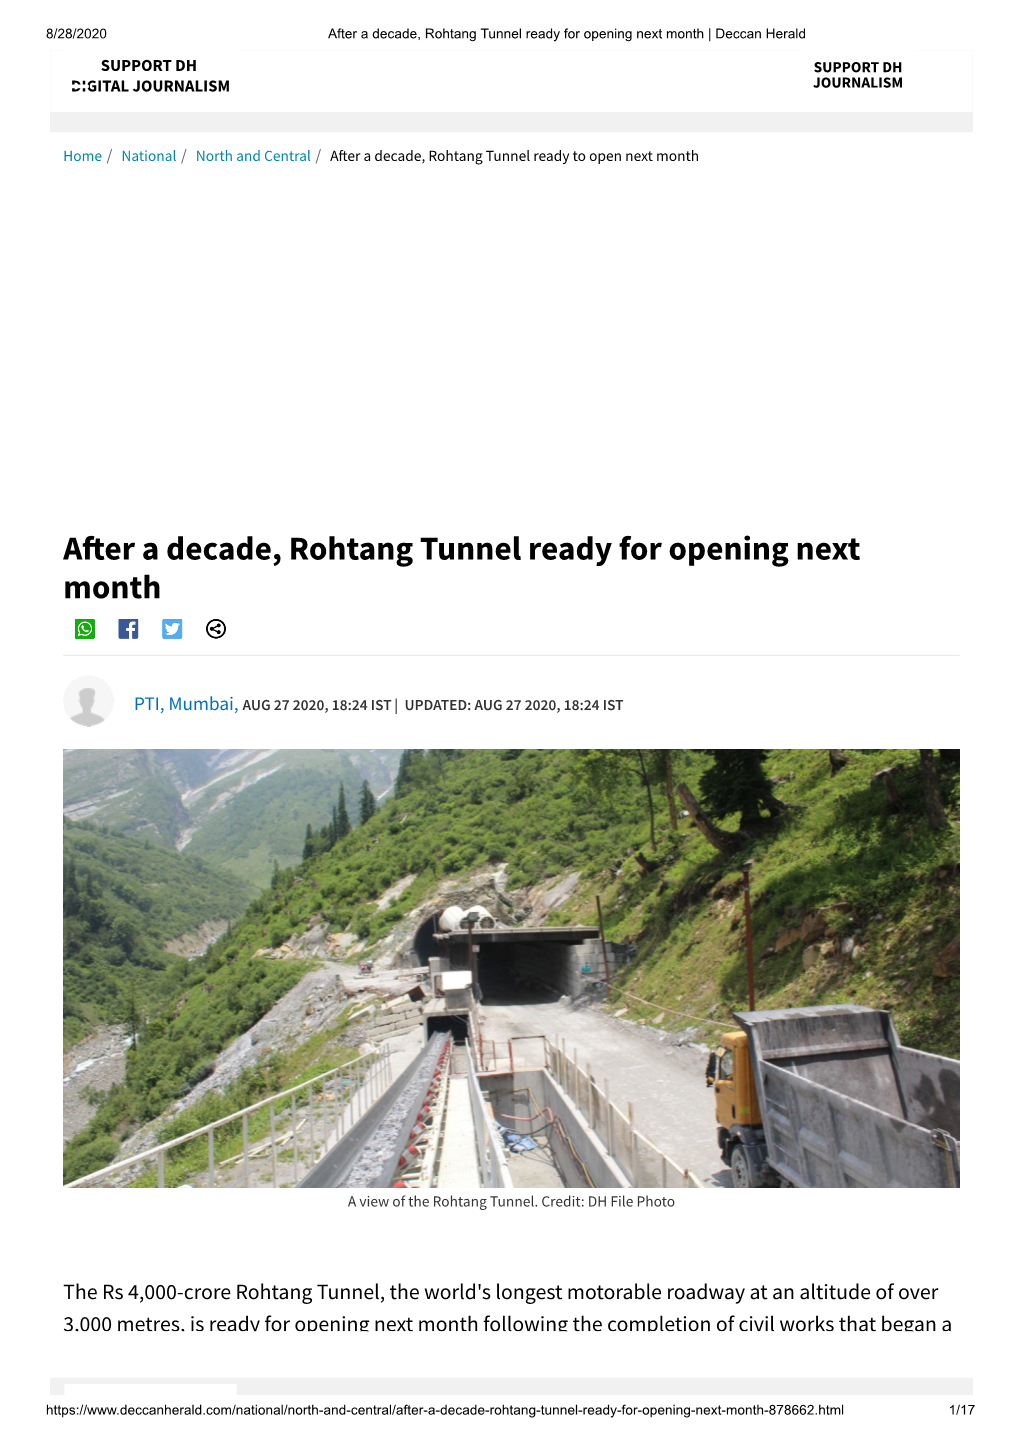 A Er a Decade, Rohtang Tunnel Ready for Opening Next Month